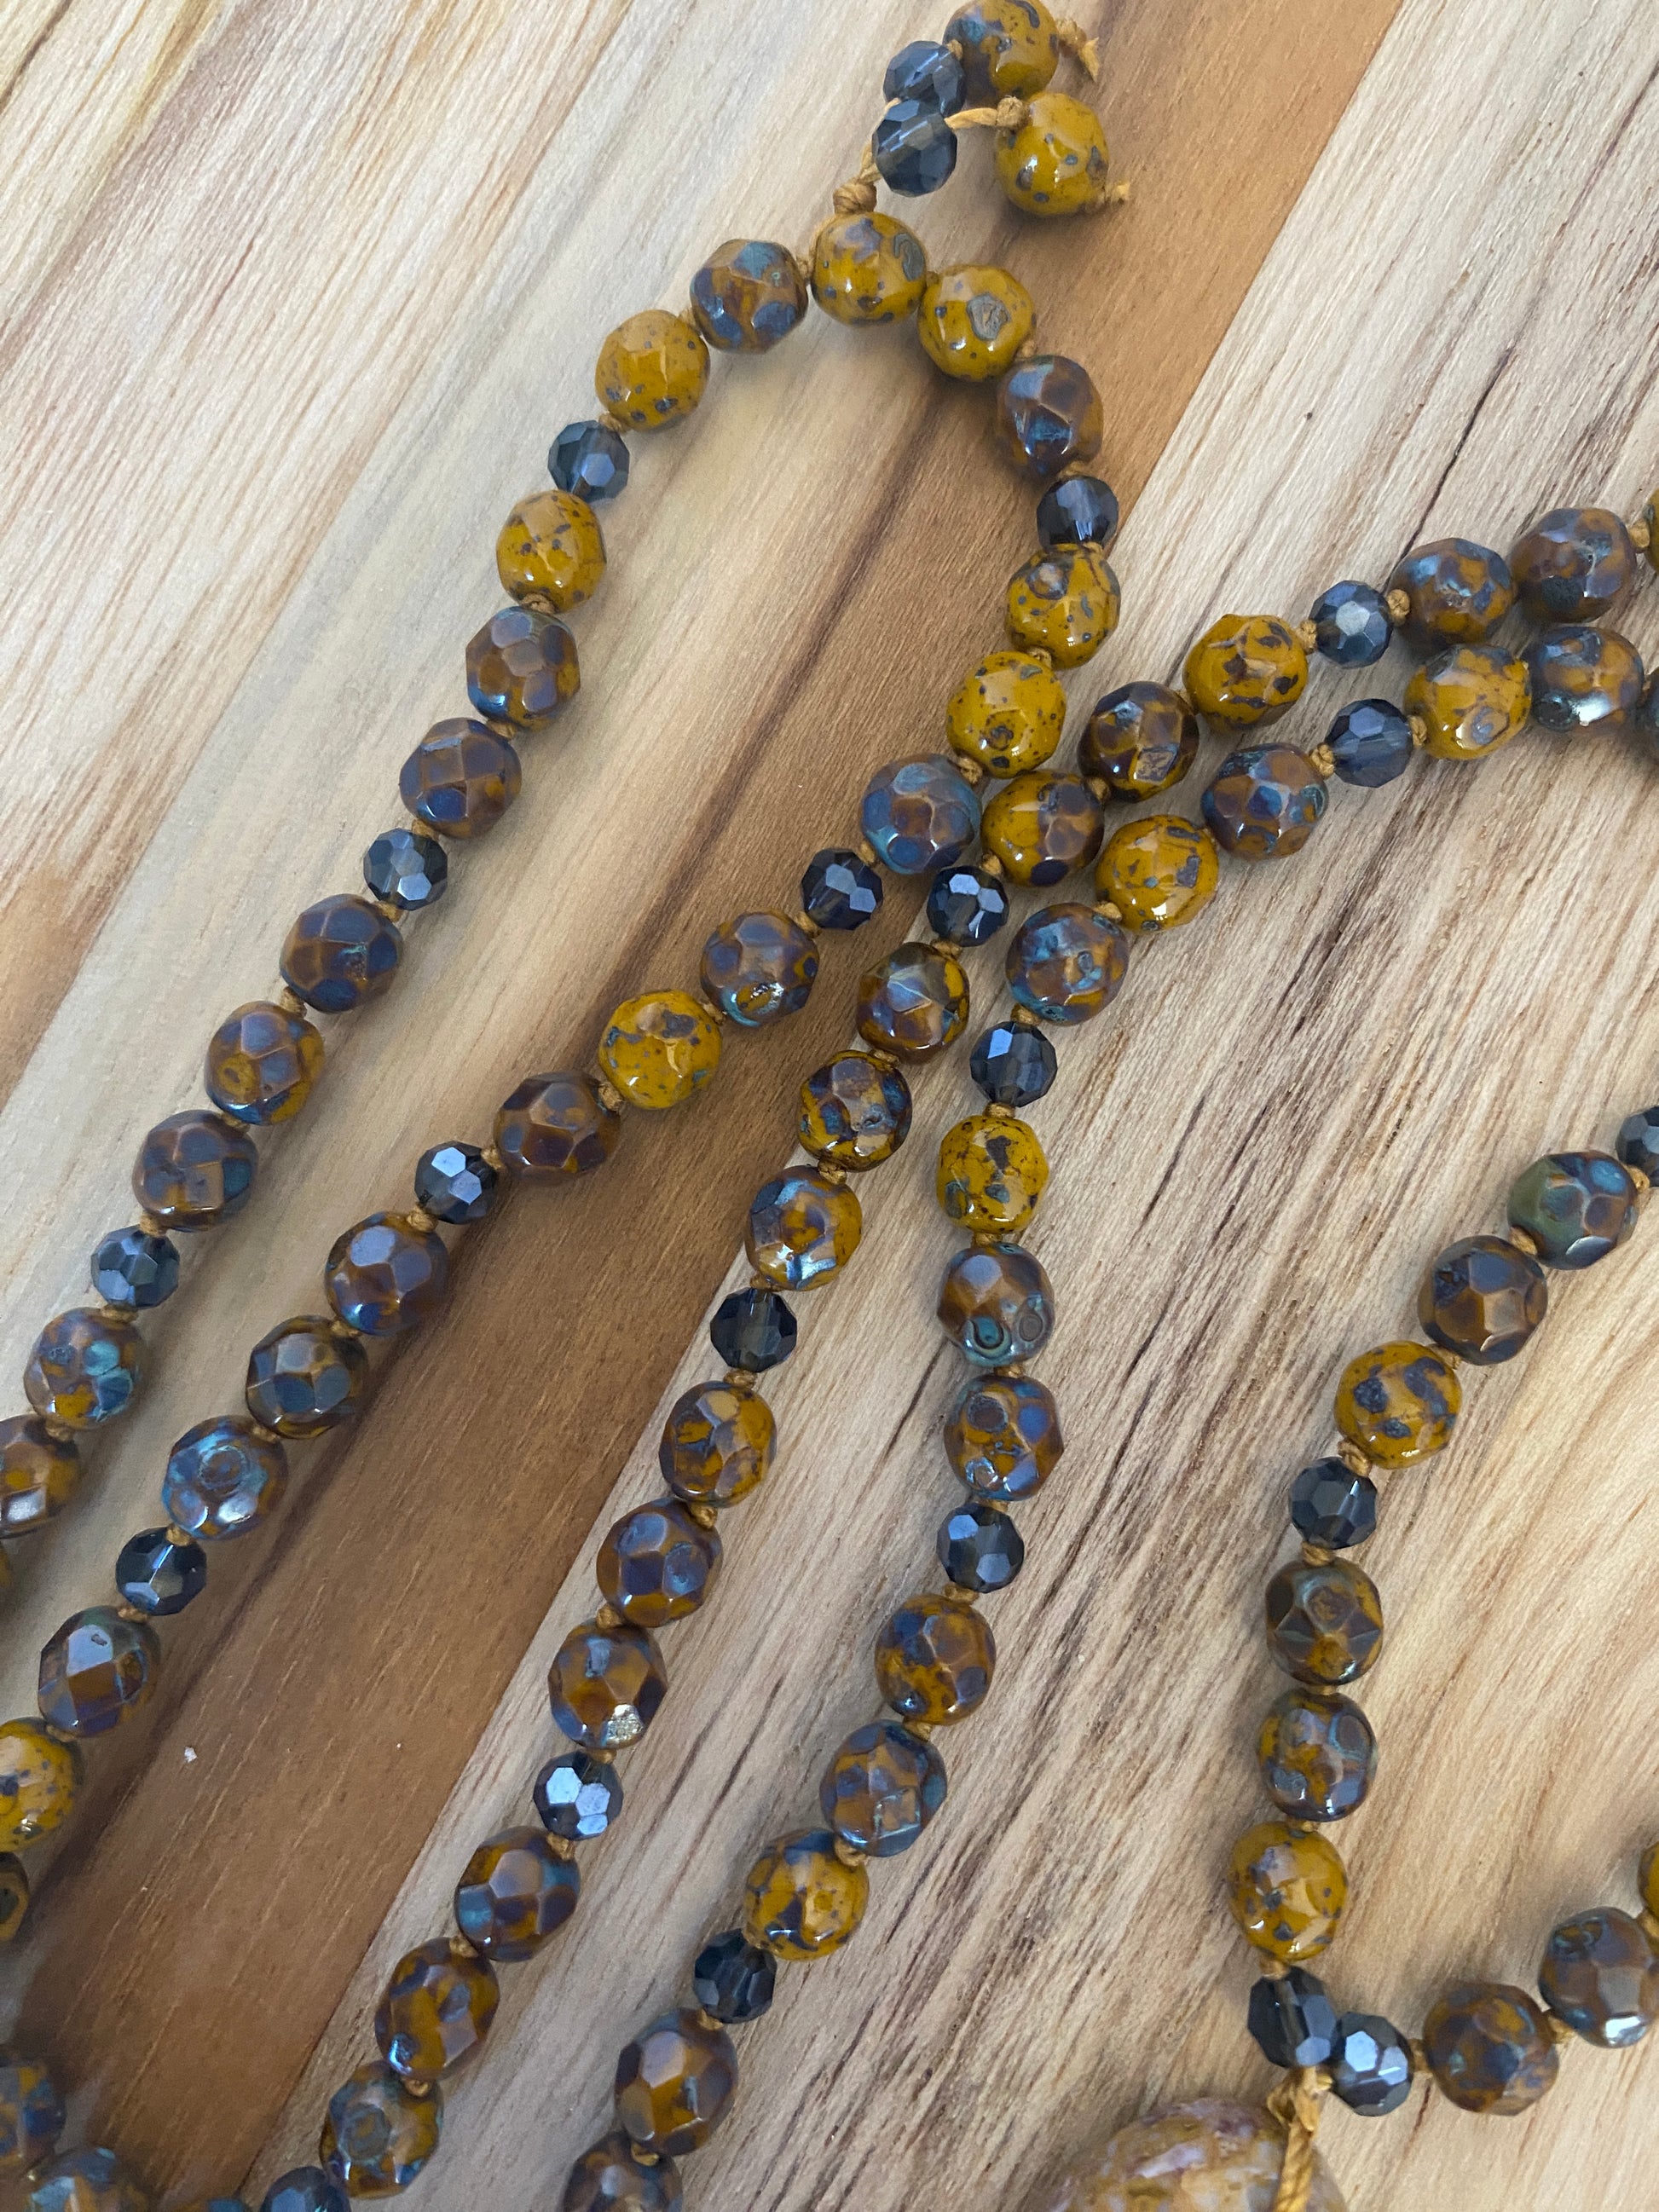 28" Long Hand Knotted Jasper Pendant Necklace with mustard/Blue Czech Glass & Crystal Beads - My Urban Gems